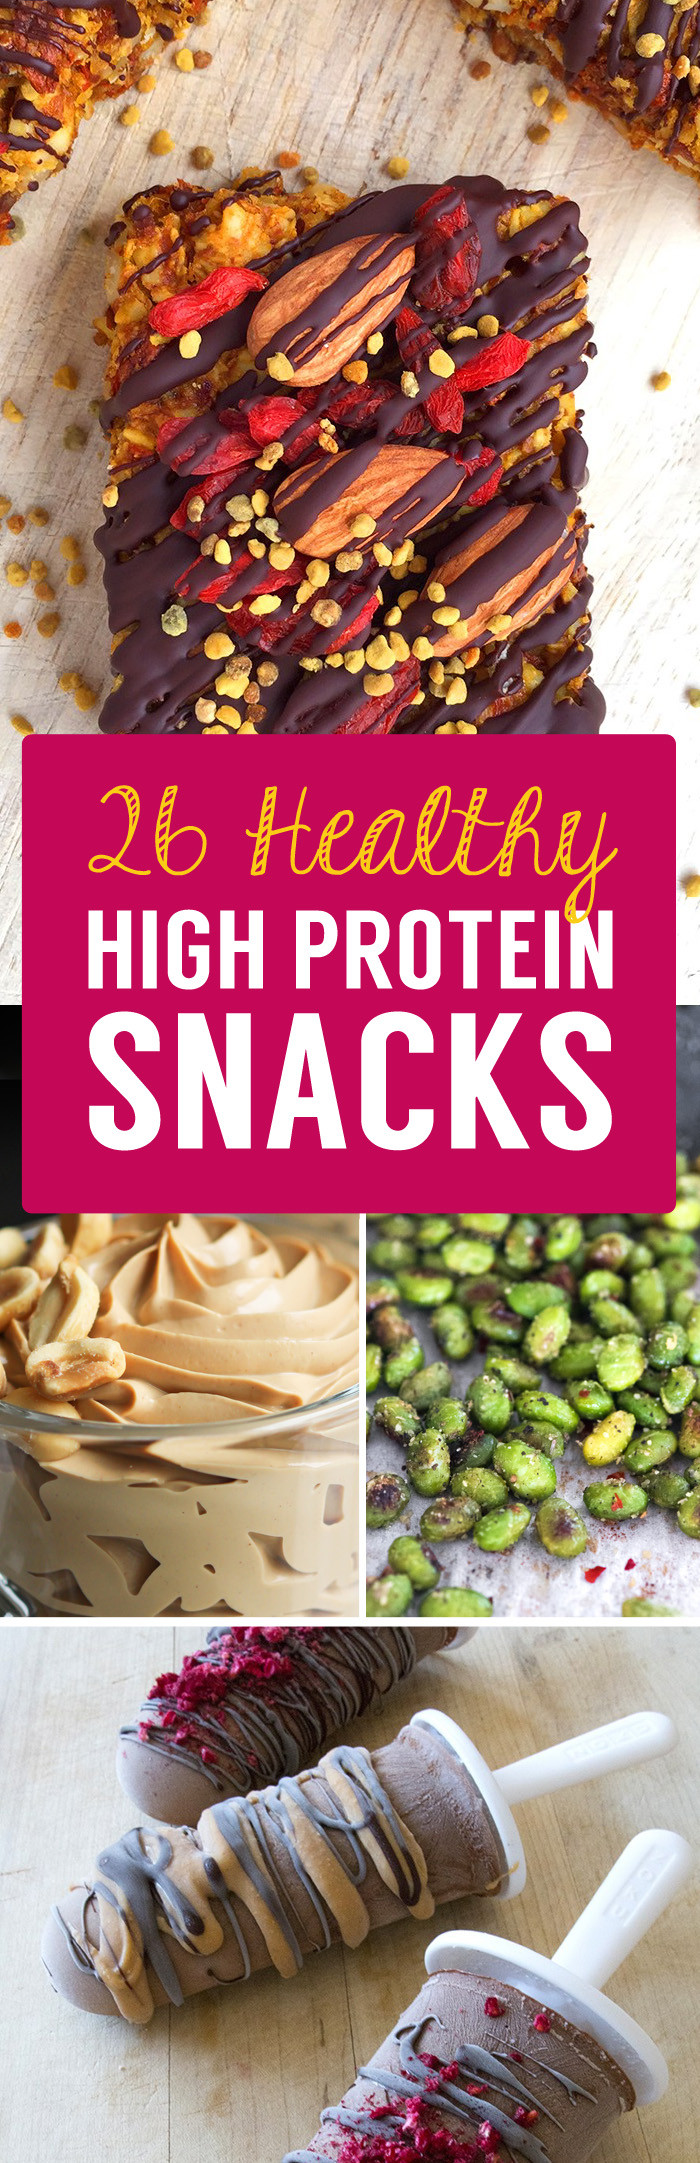 Protein Snacks Recipes
 26 High Protein Snacks That Will Help You Lose Fat & Feel